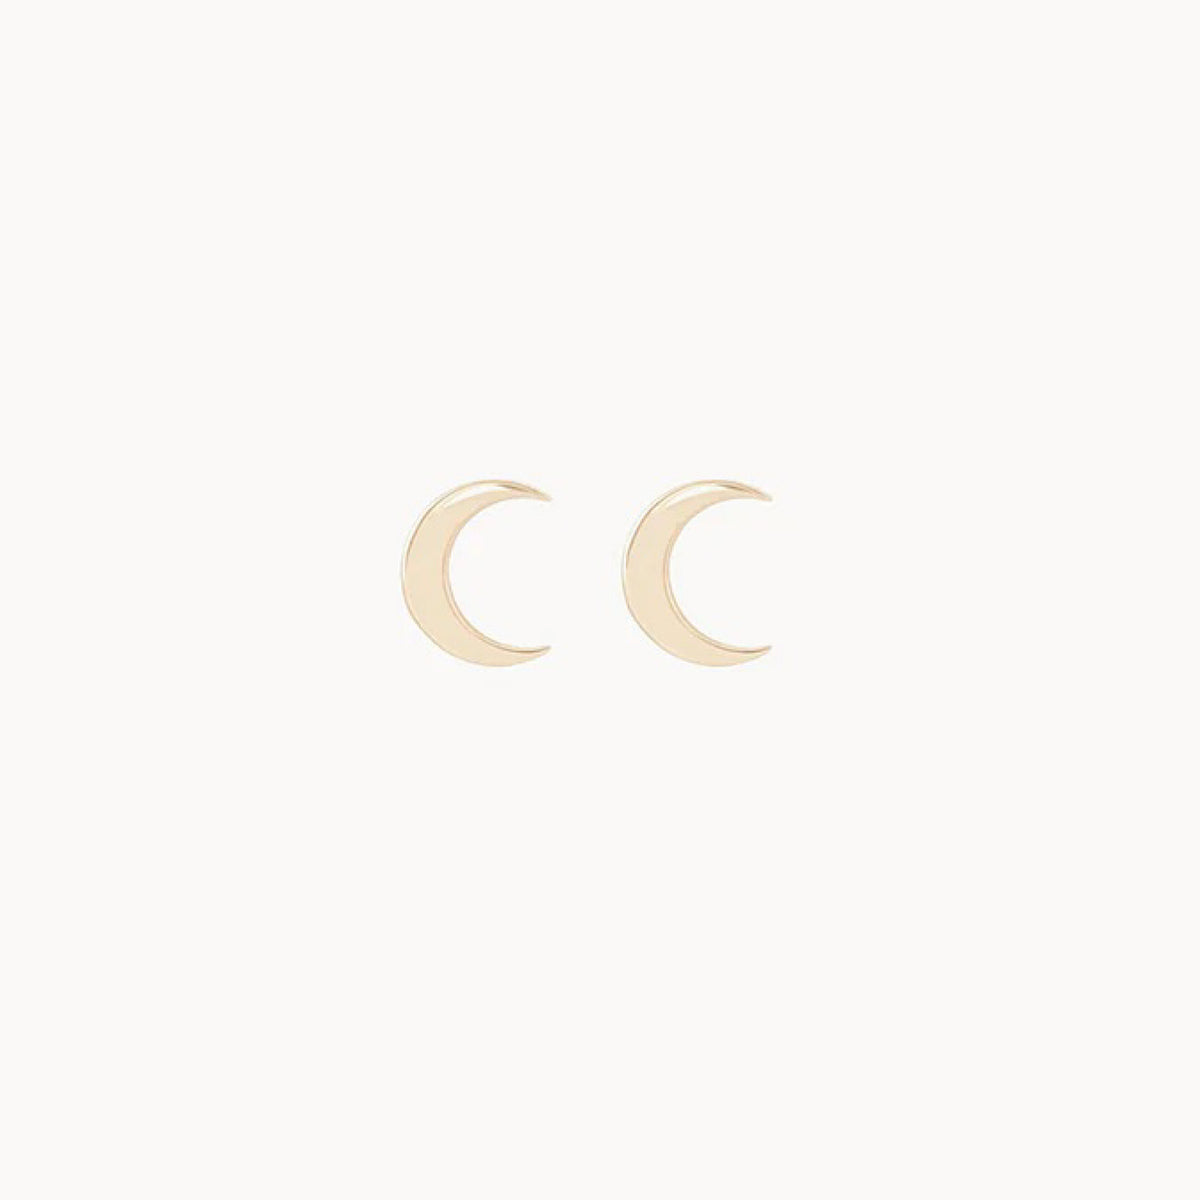 Everyday Larger Crescent Moon Earrings, 14k